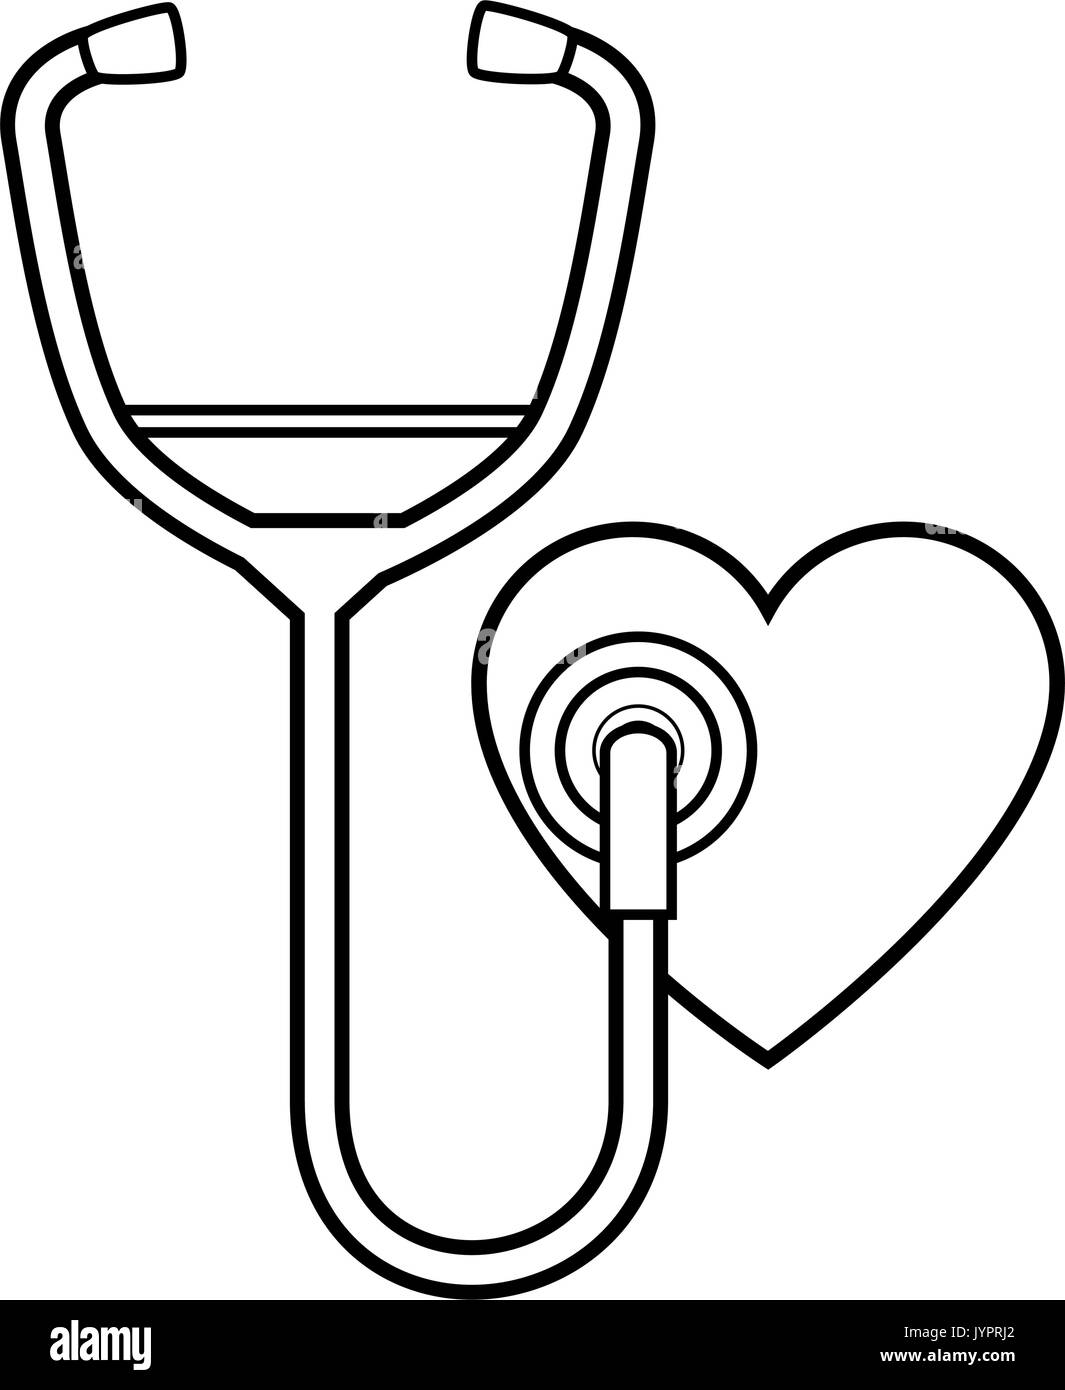 Stethoscope heart Black and White Stock Photos & Images - Alamy